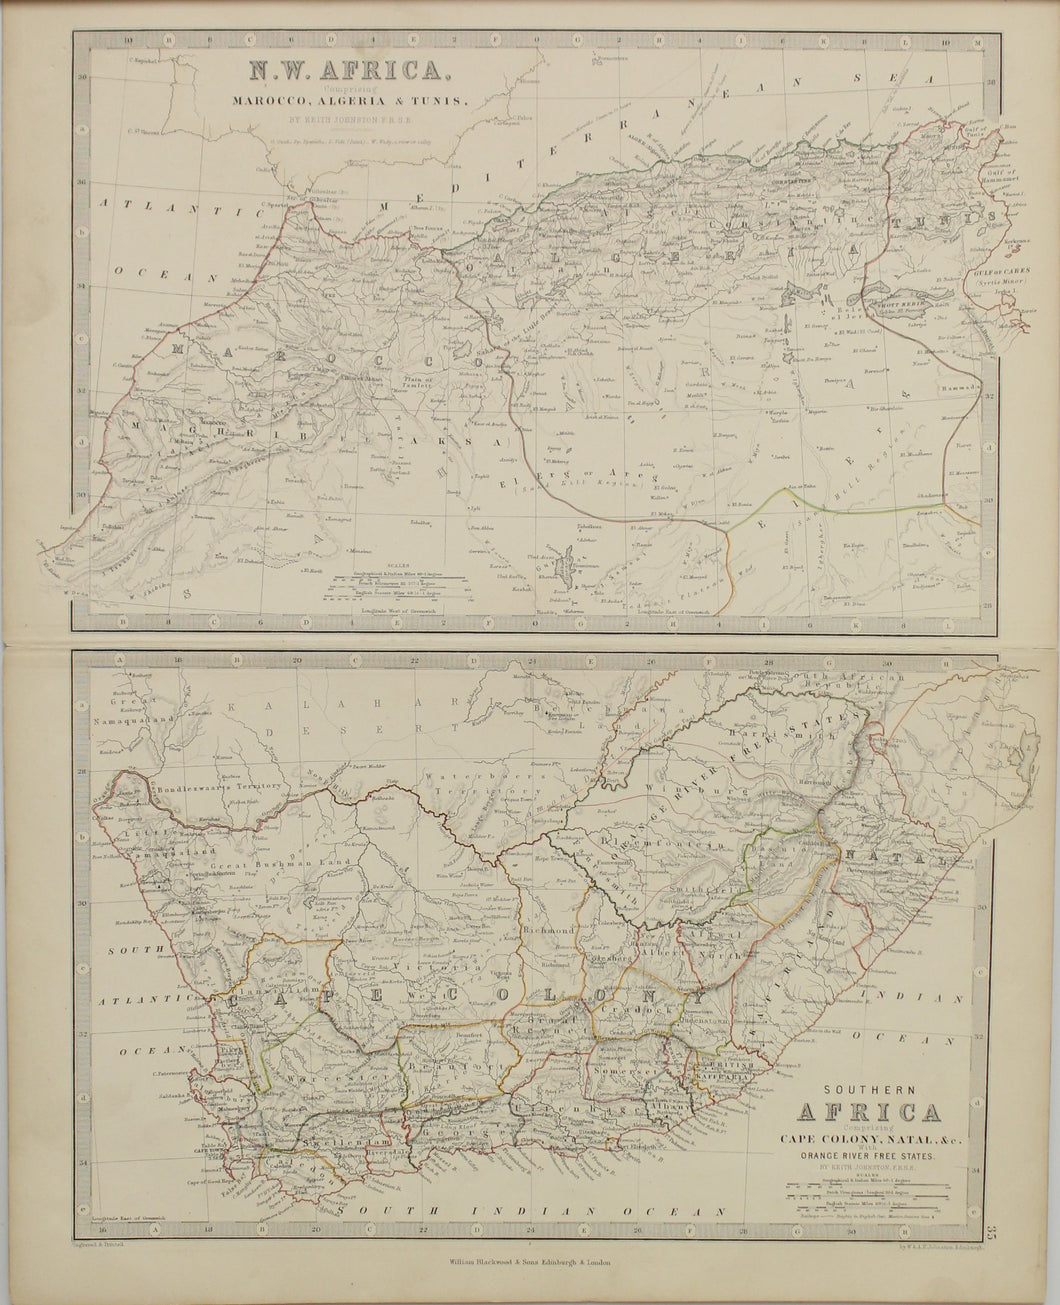 Map, William Blackwood and Sons, North West Africa, and Southern Africa, c1864